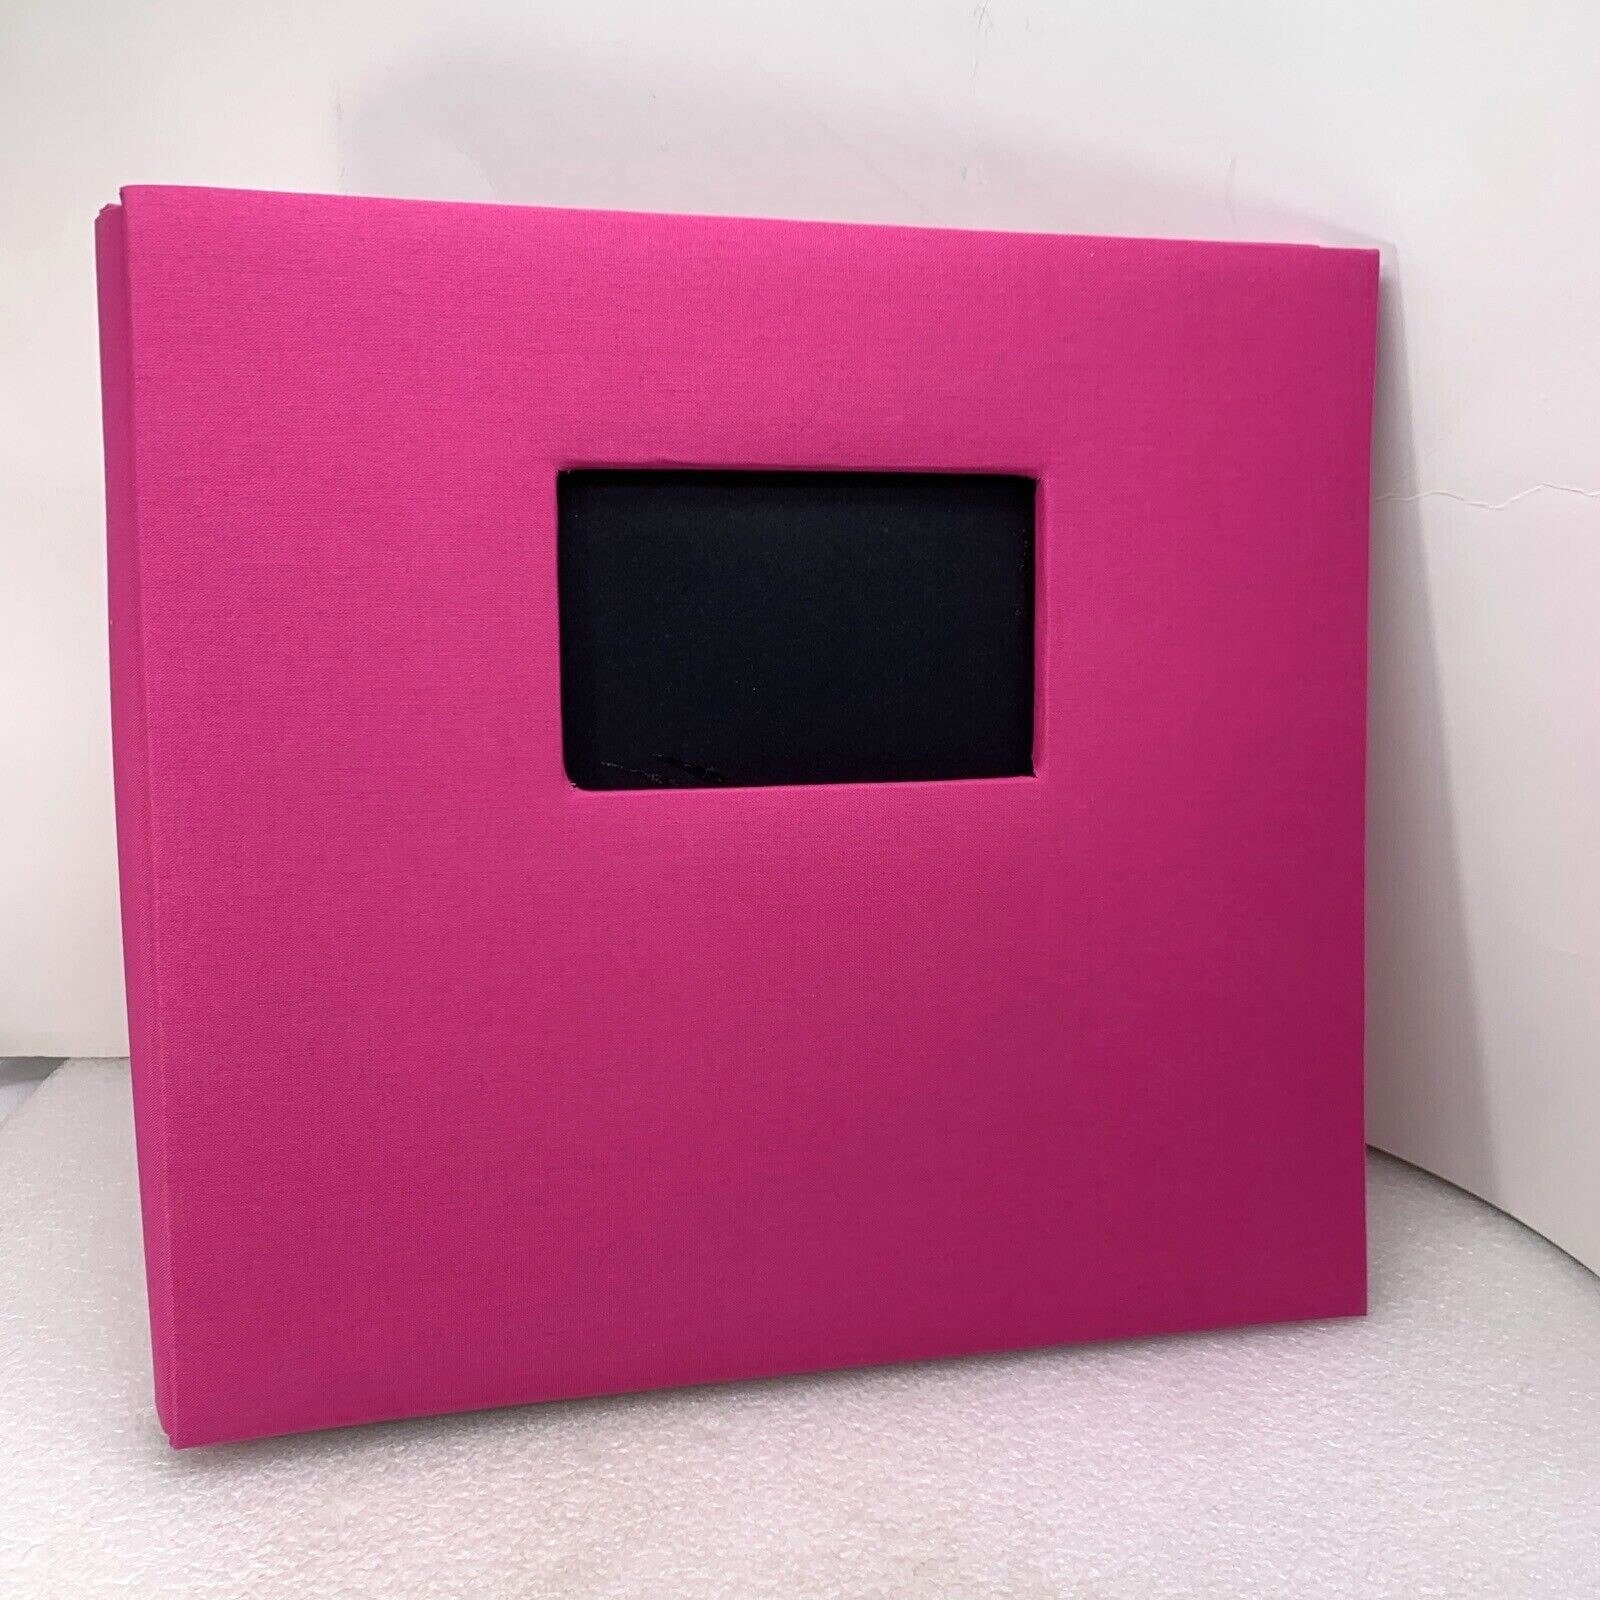 CheckOutStore 100 CD Double-Sided Plastic Sleeve Pink